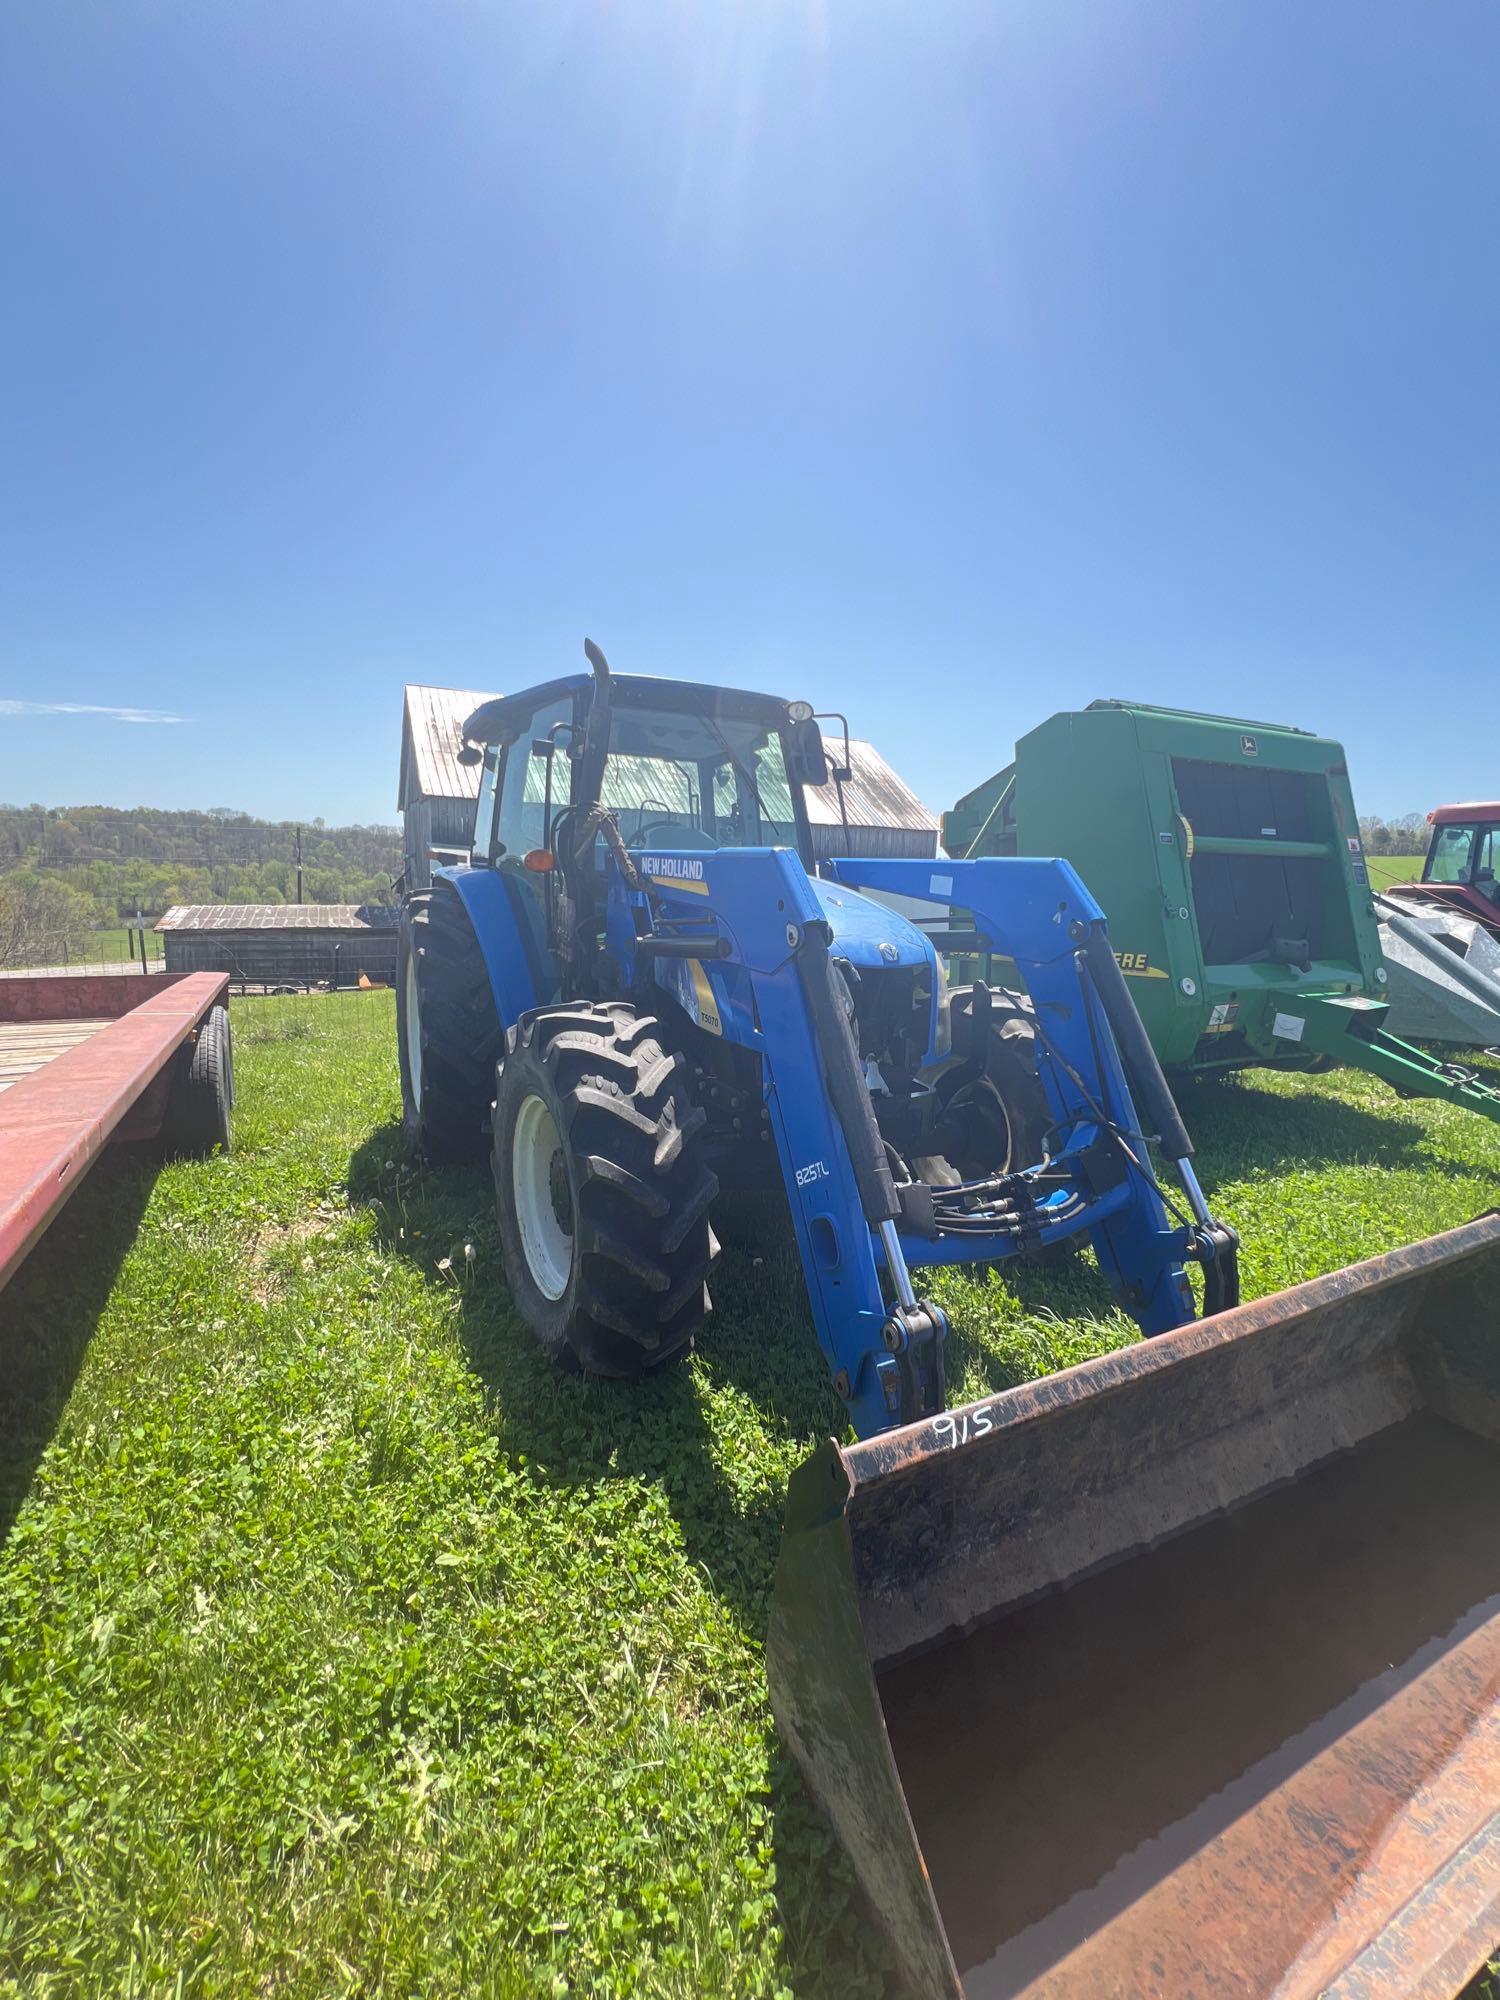 New Holland T5070 cab tractor